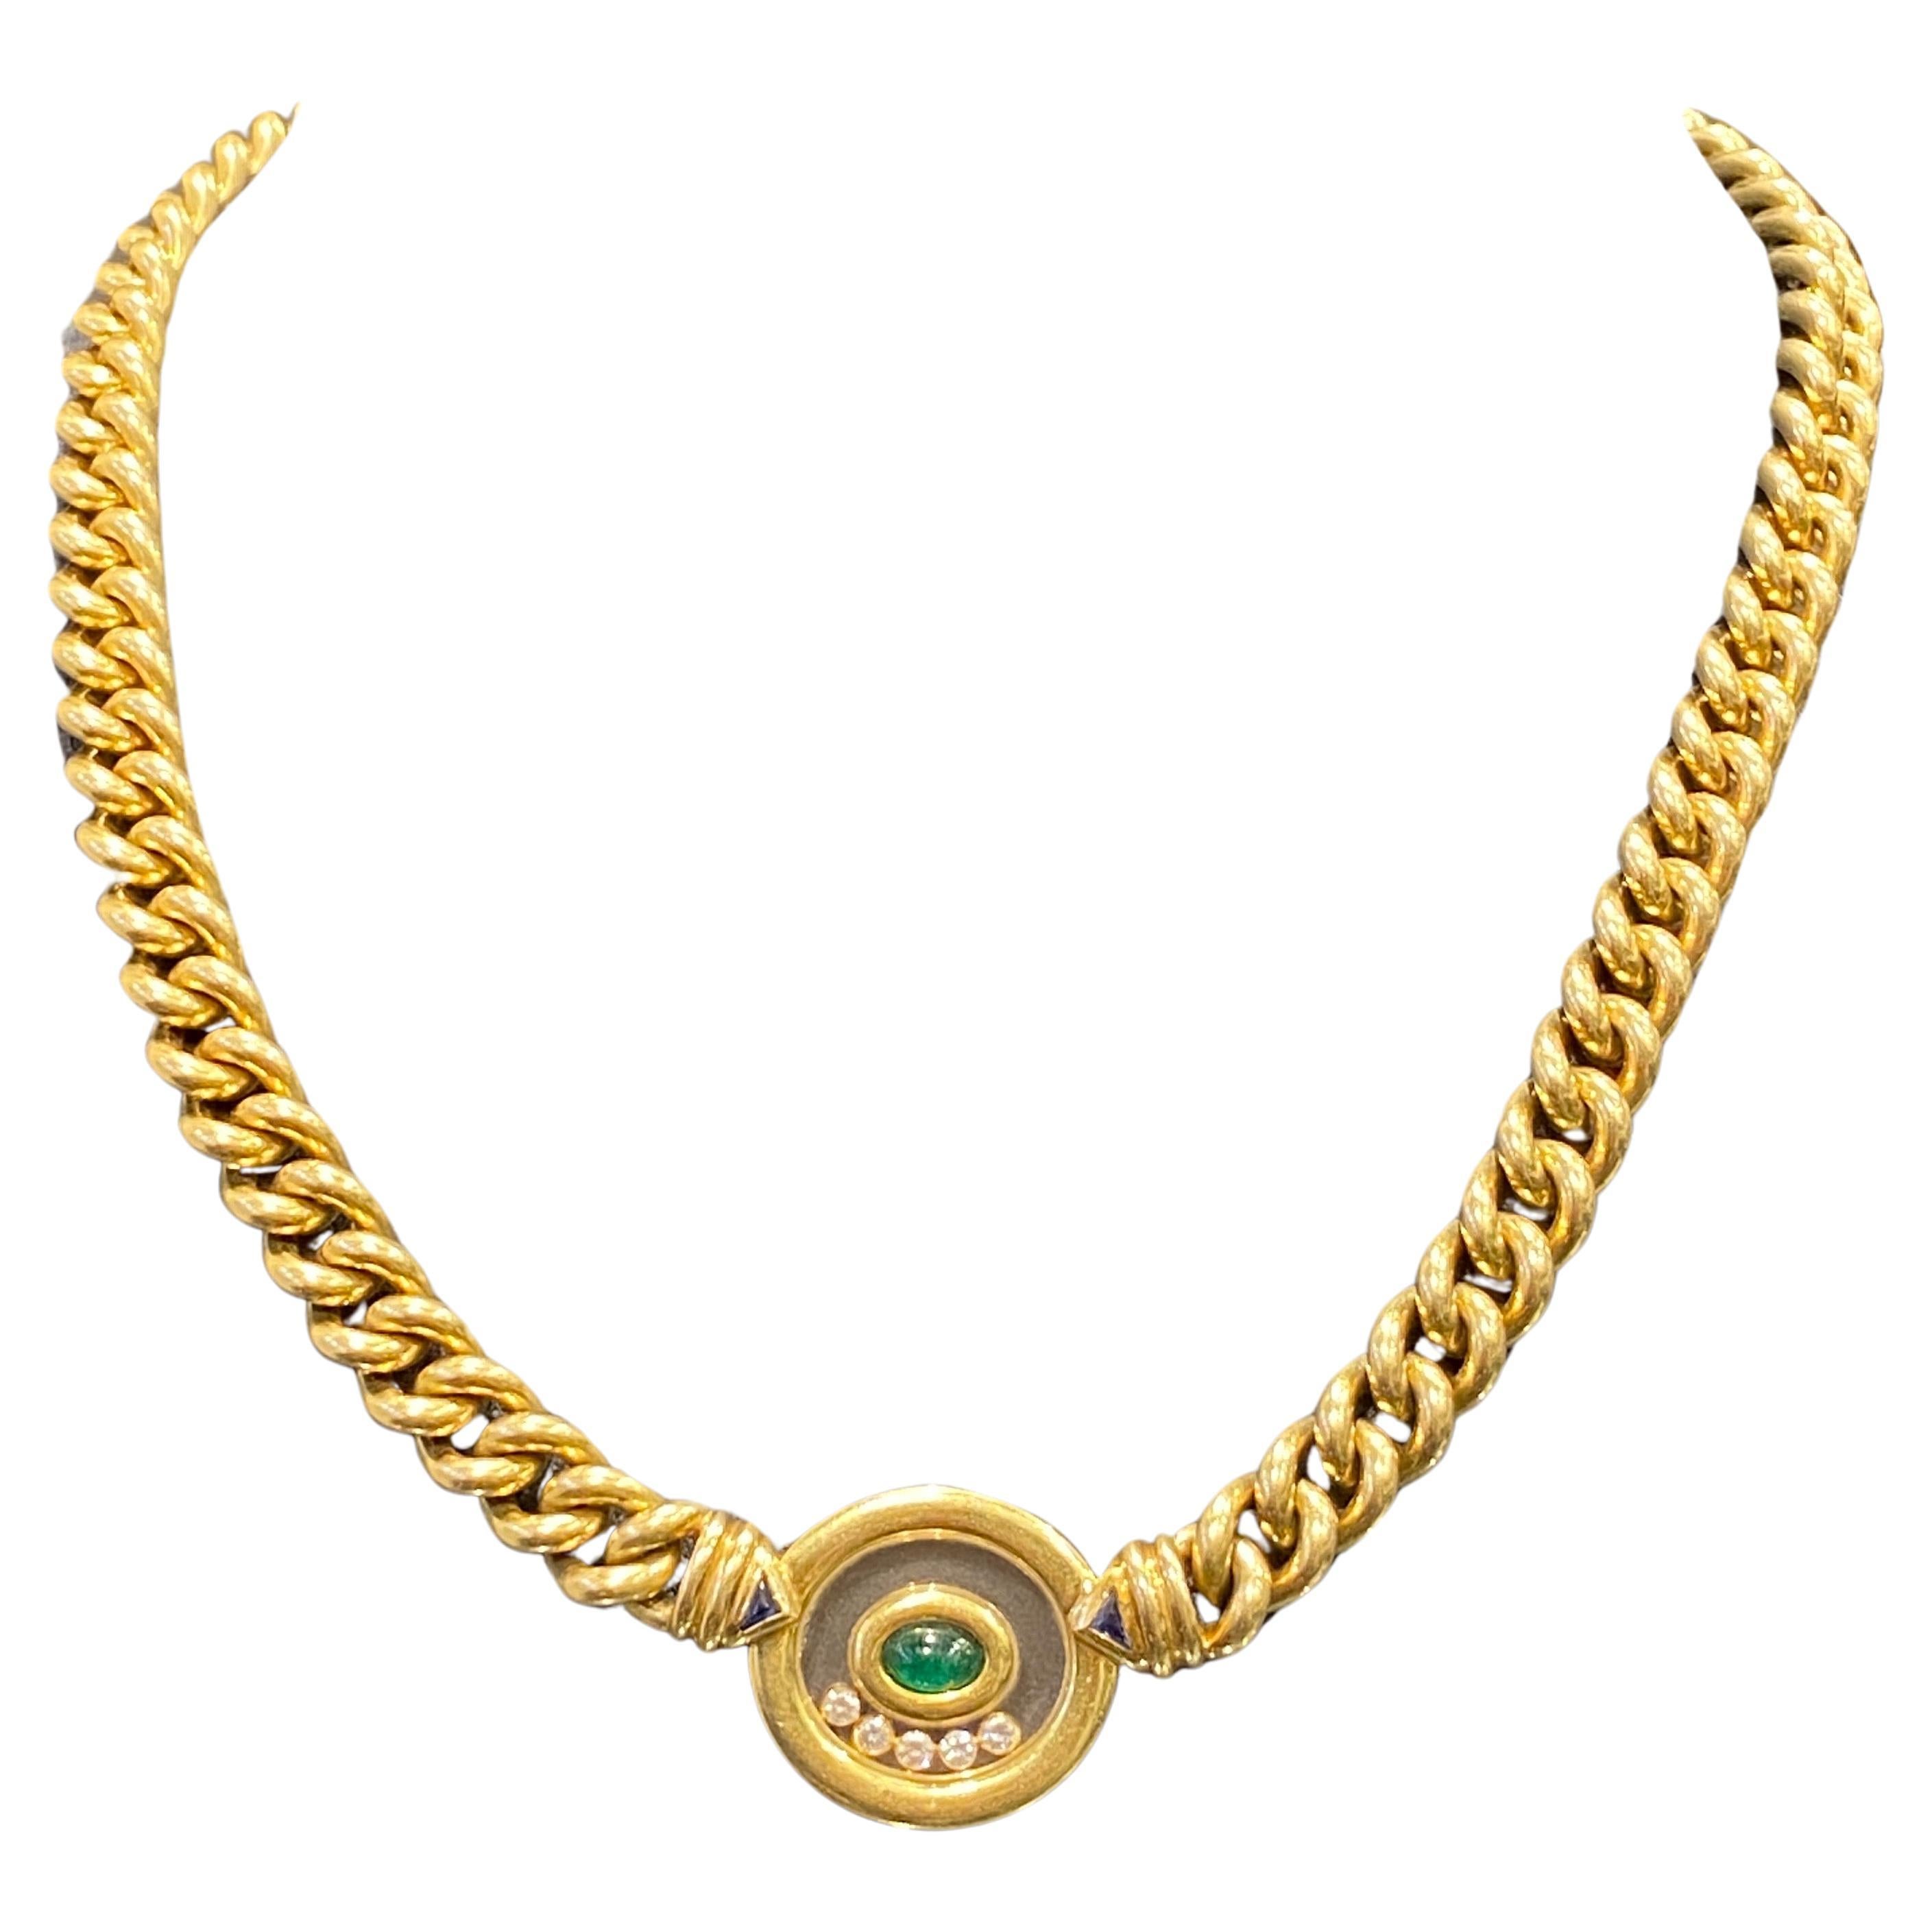 1980s Chopard 18k gold chain necklace with cabochon emerald and 5 Happy diamonds